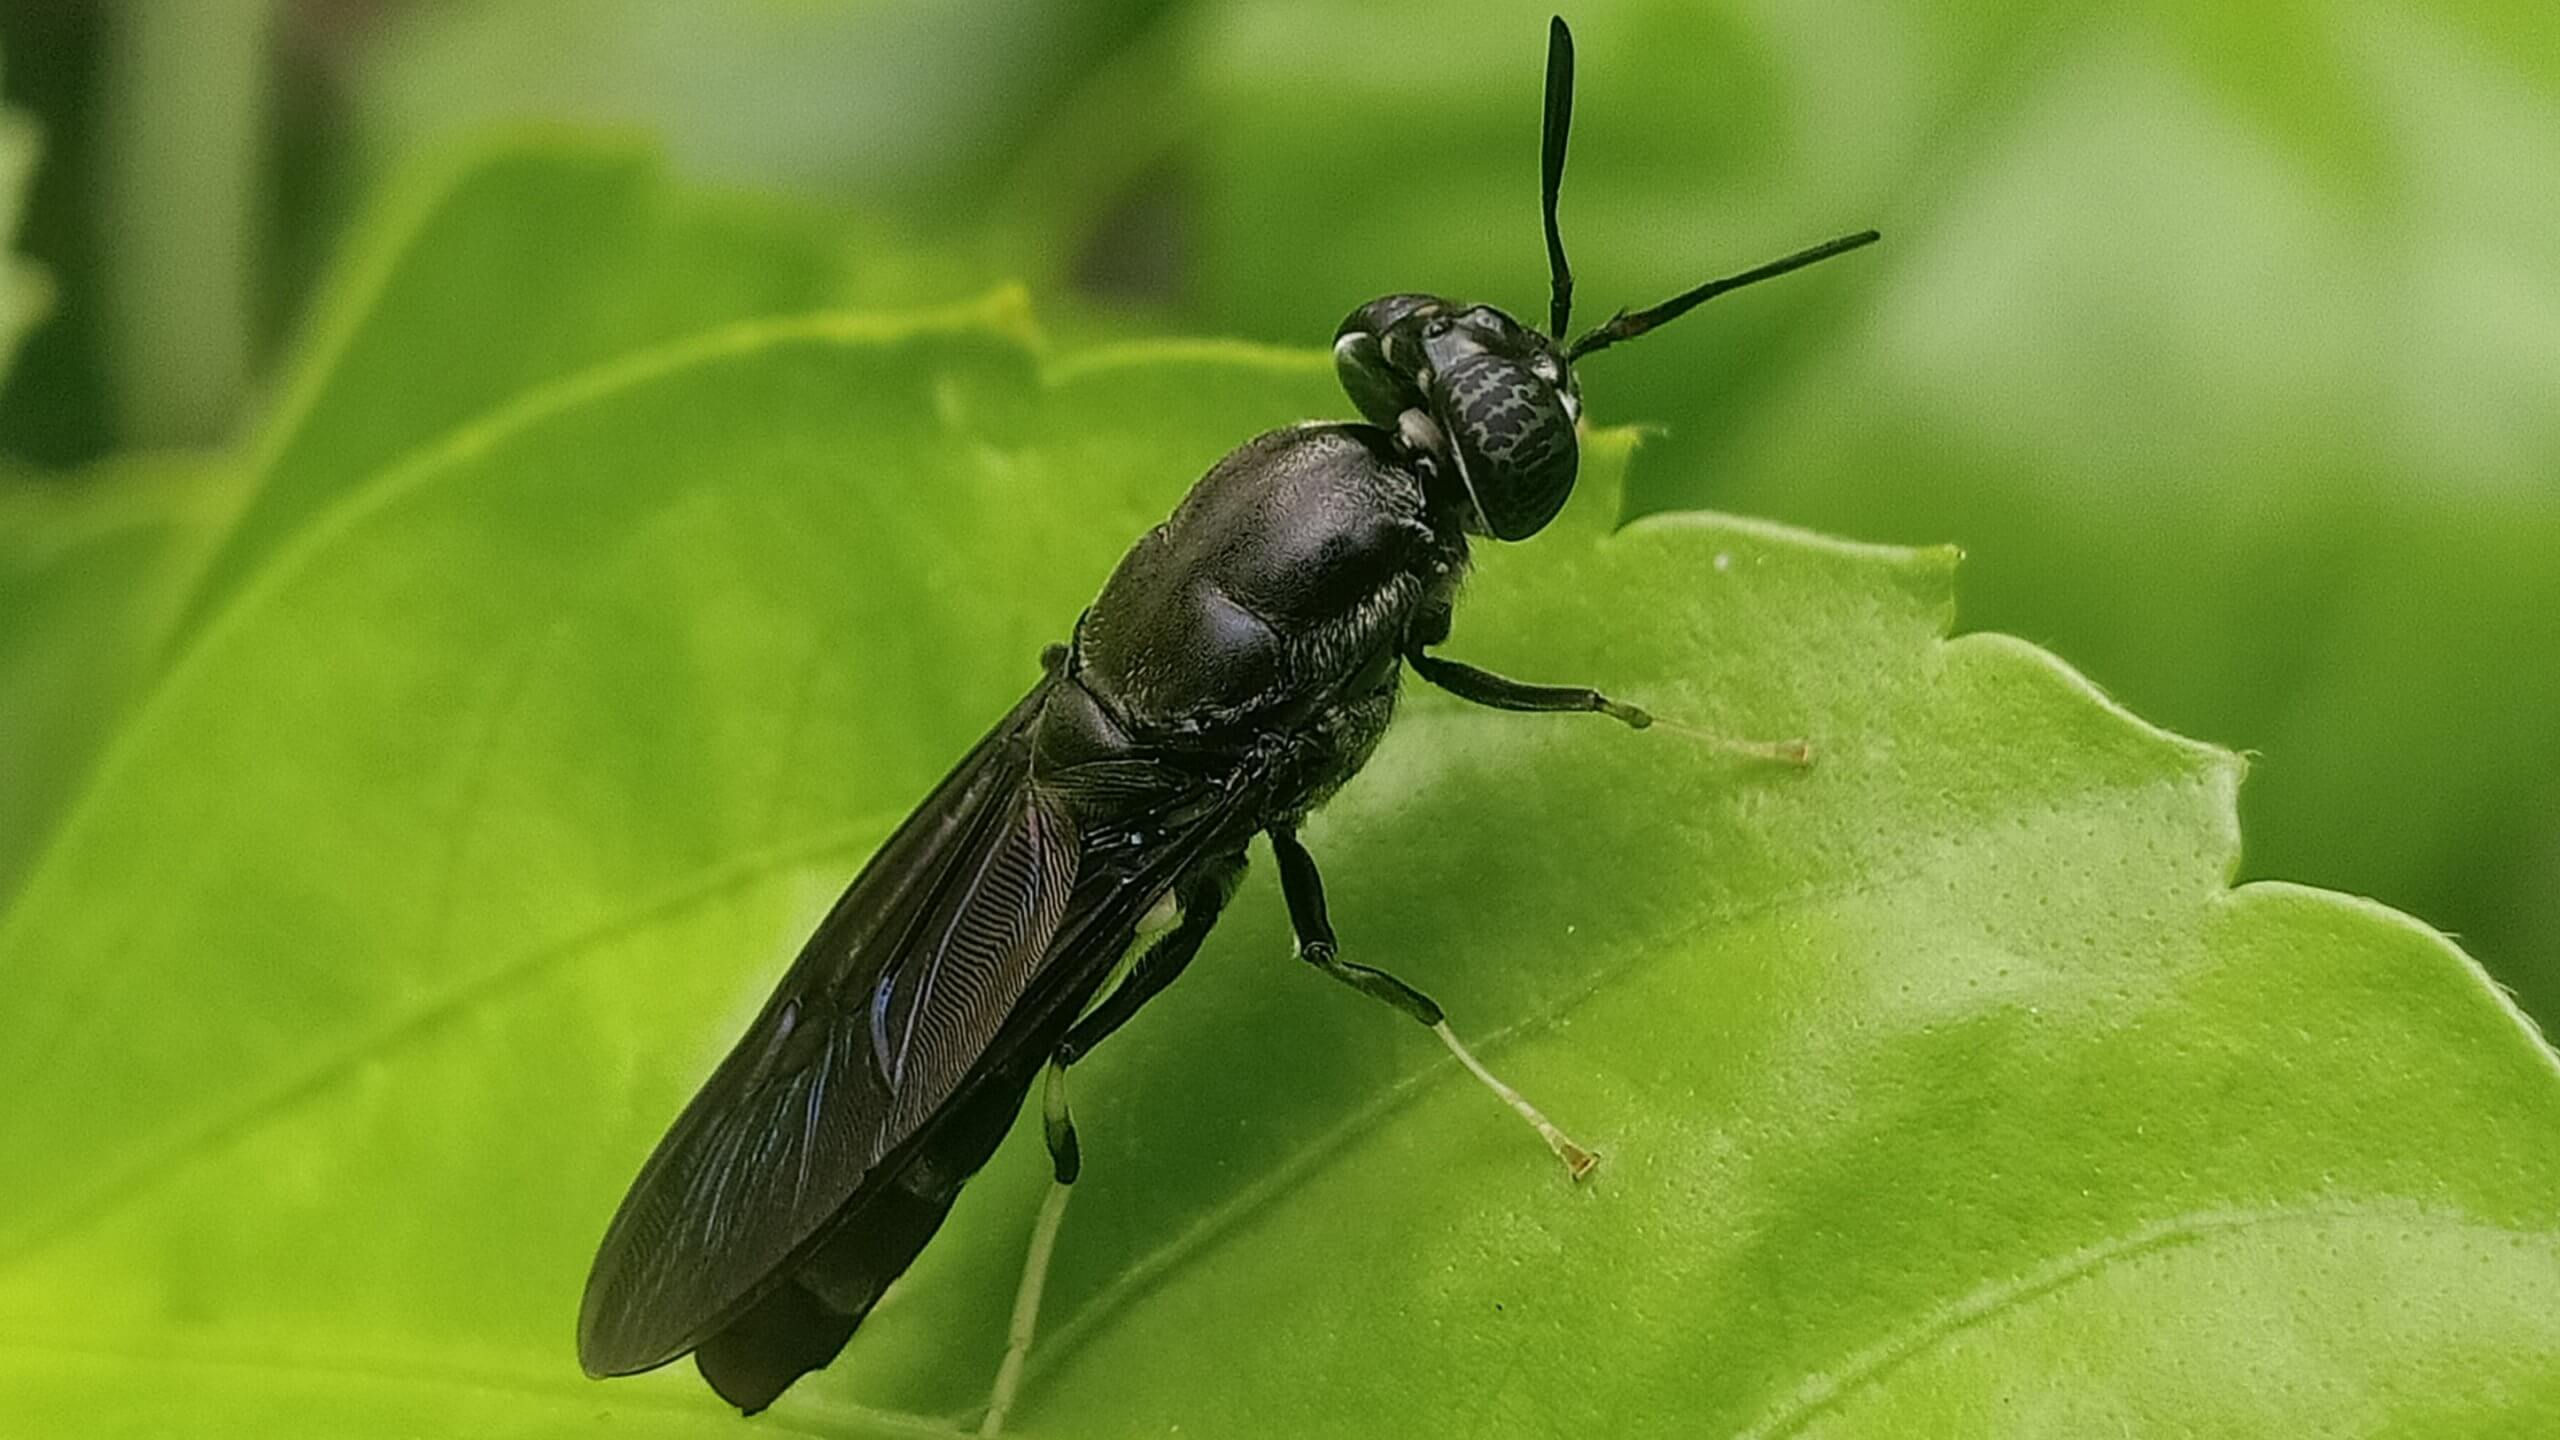 black soldier fly (BSF)